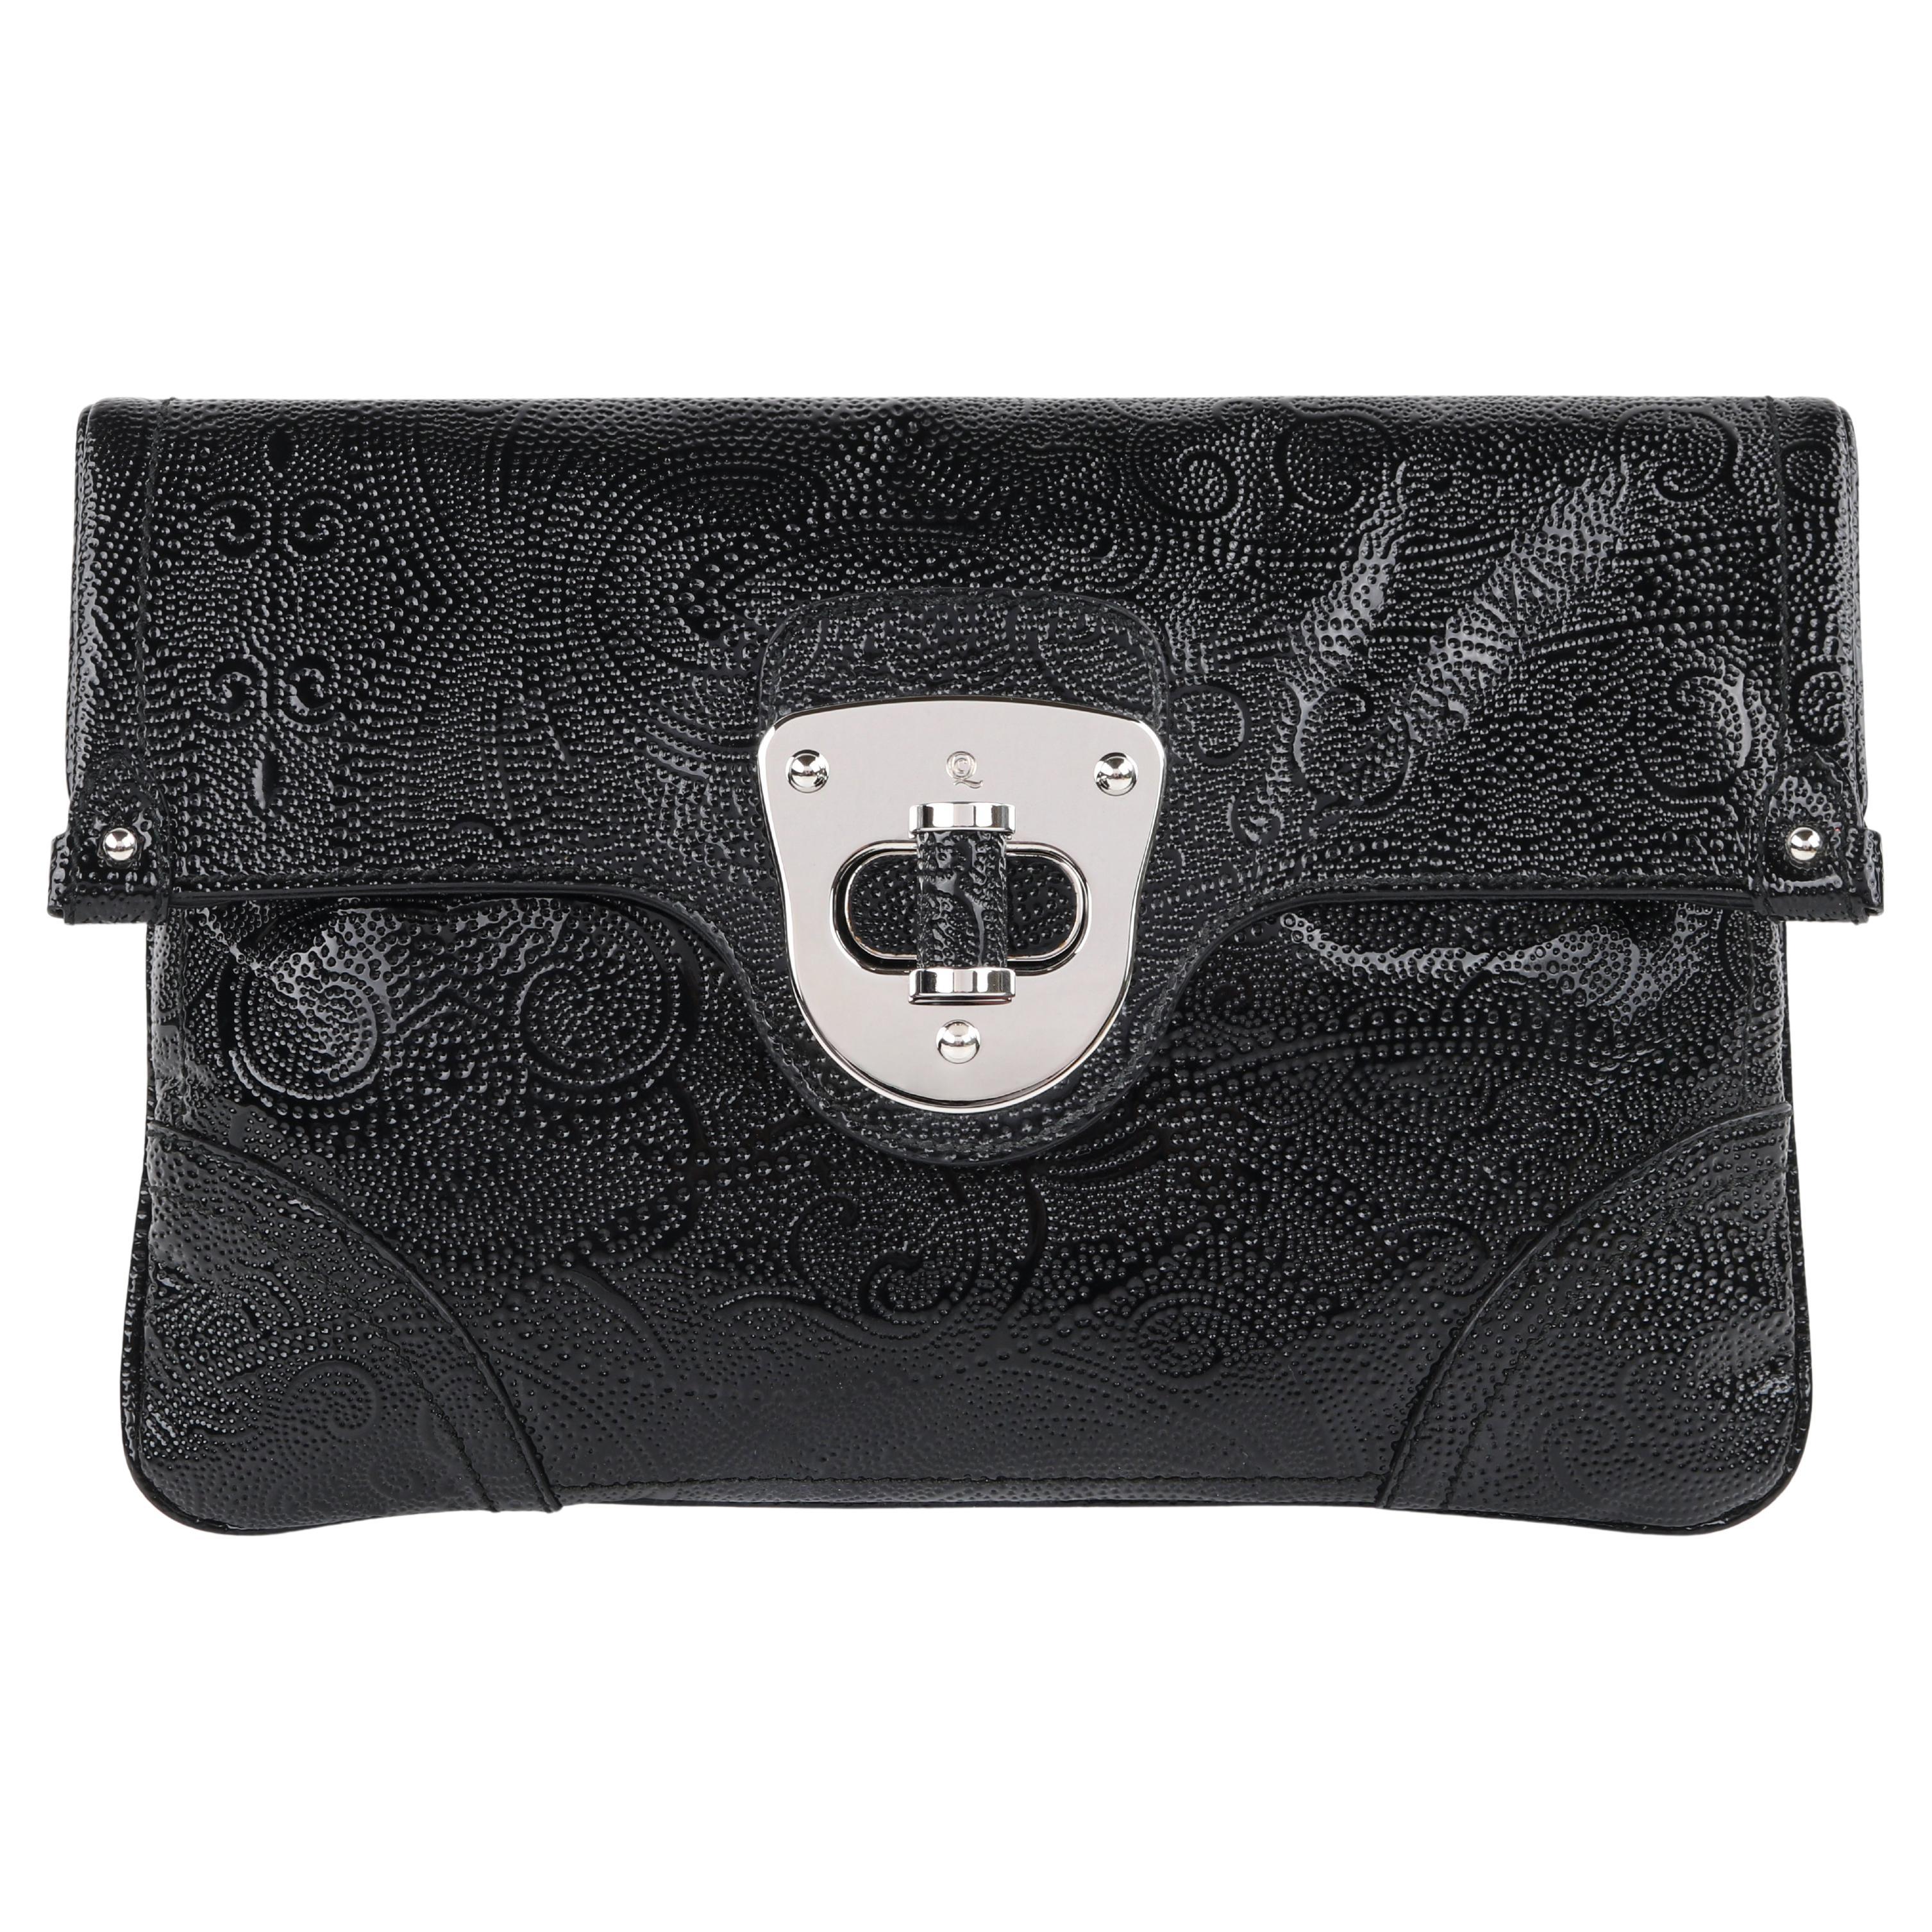 ALEXANDER McQUEEN c.2008 Black Leather Paisley Embossed Large Clutch Purse Bag For Sale